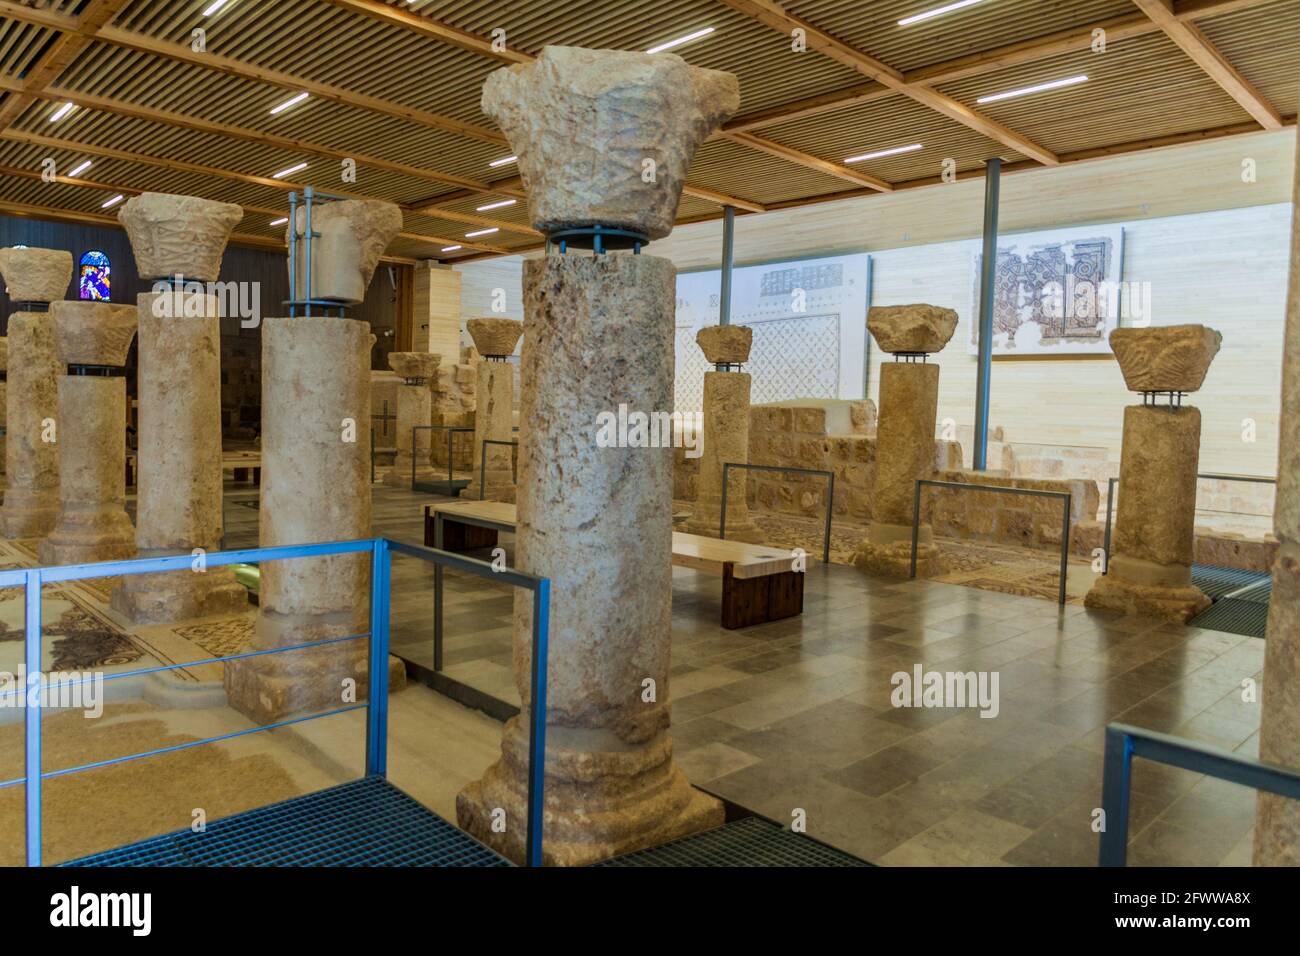 MOUNT NEBO, JORDAN - MARCH 21, 2017: Interior of the Moses Memorial church at the Mount Nebo mountain. Stock Photo